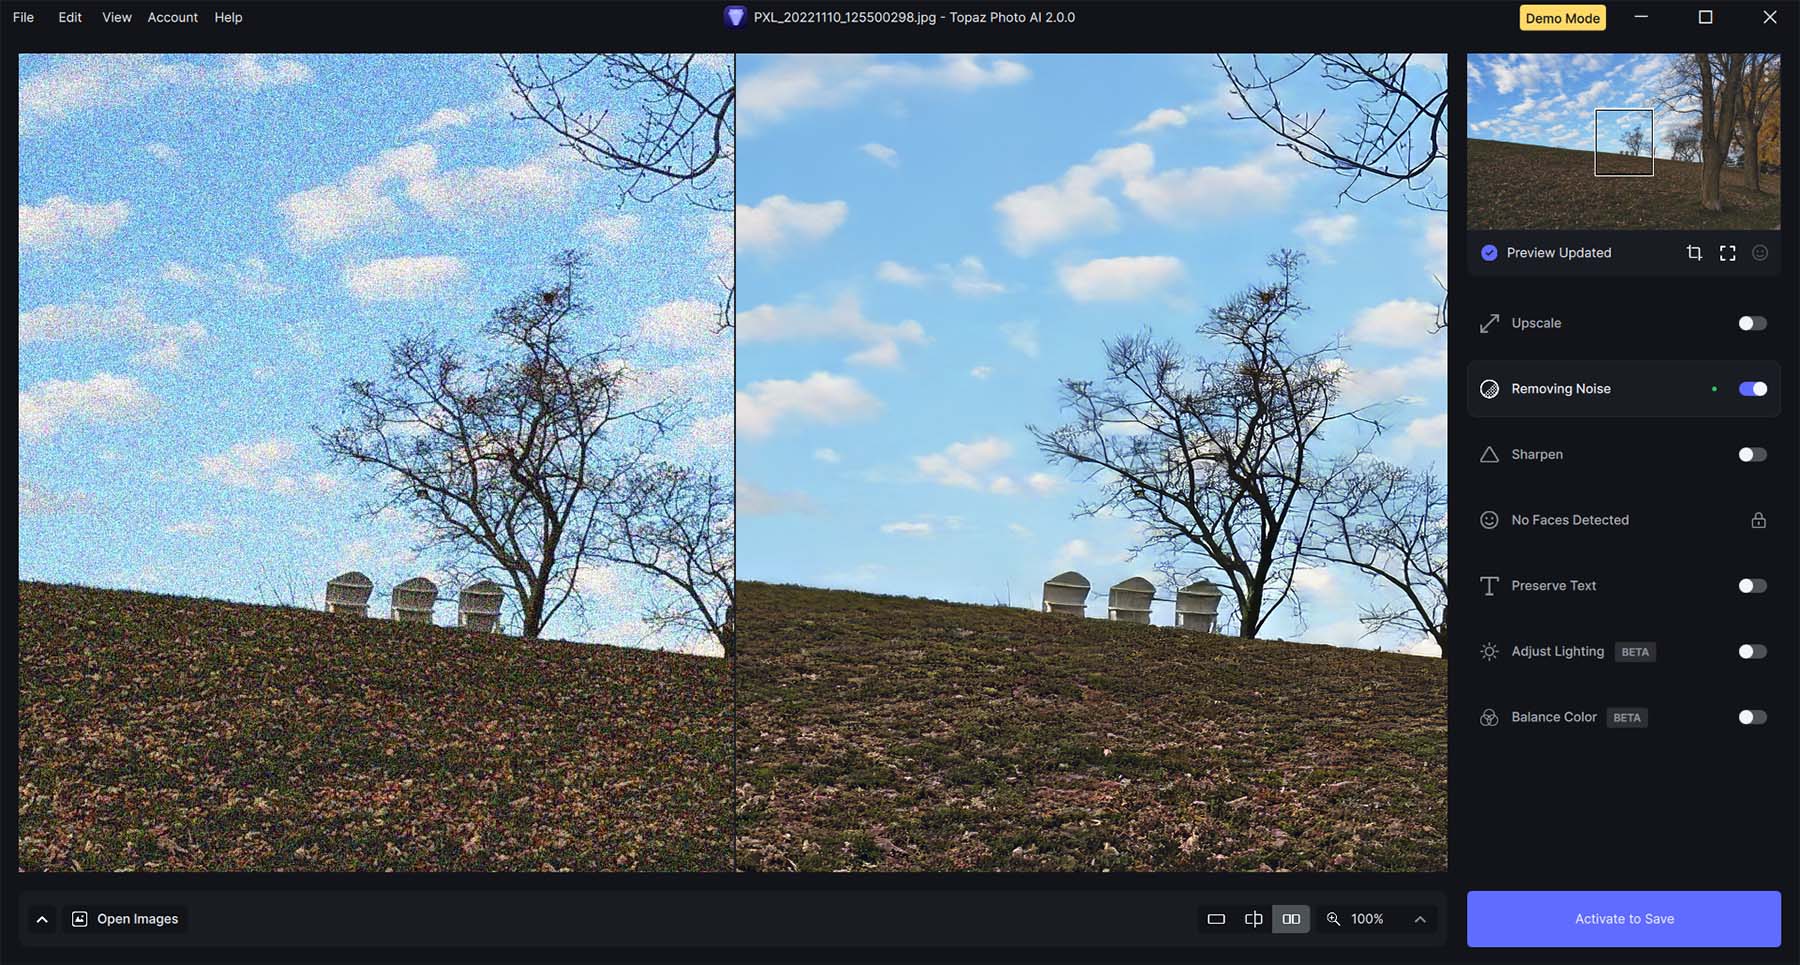 Noise reduction with Topaz